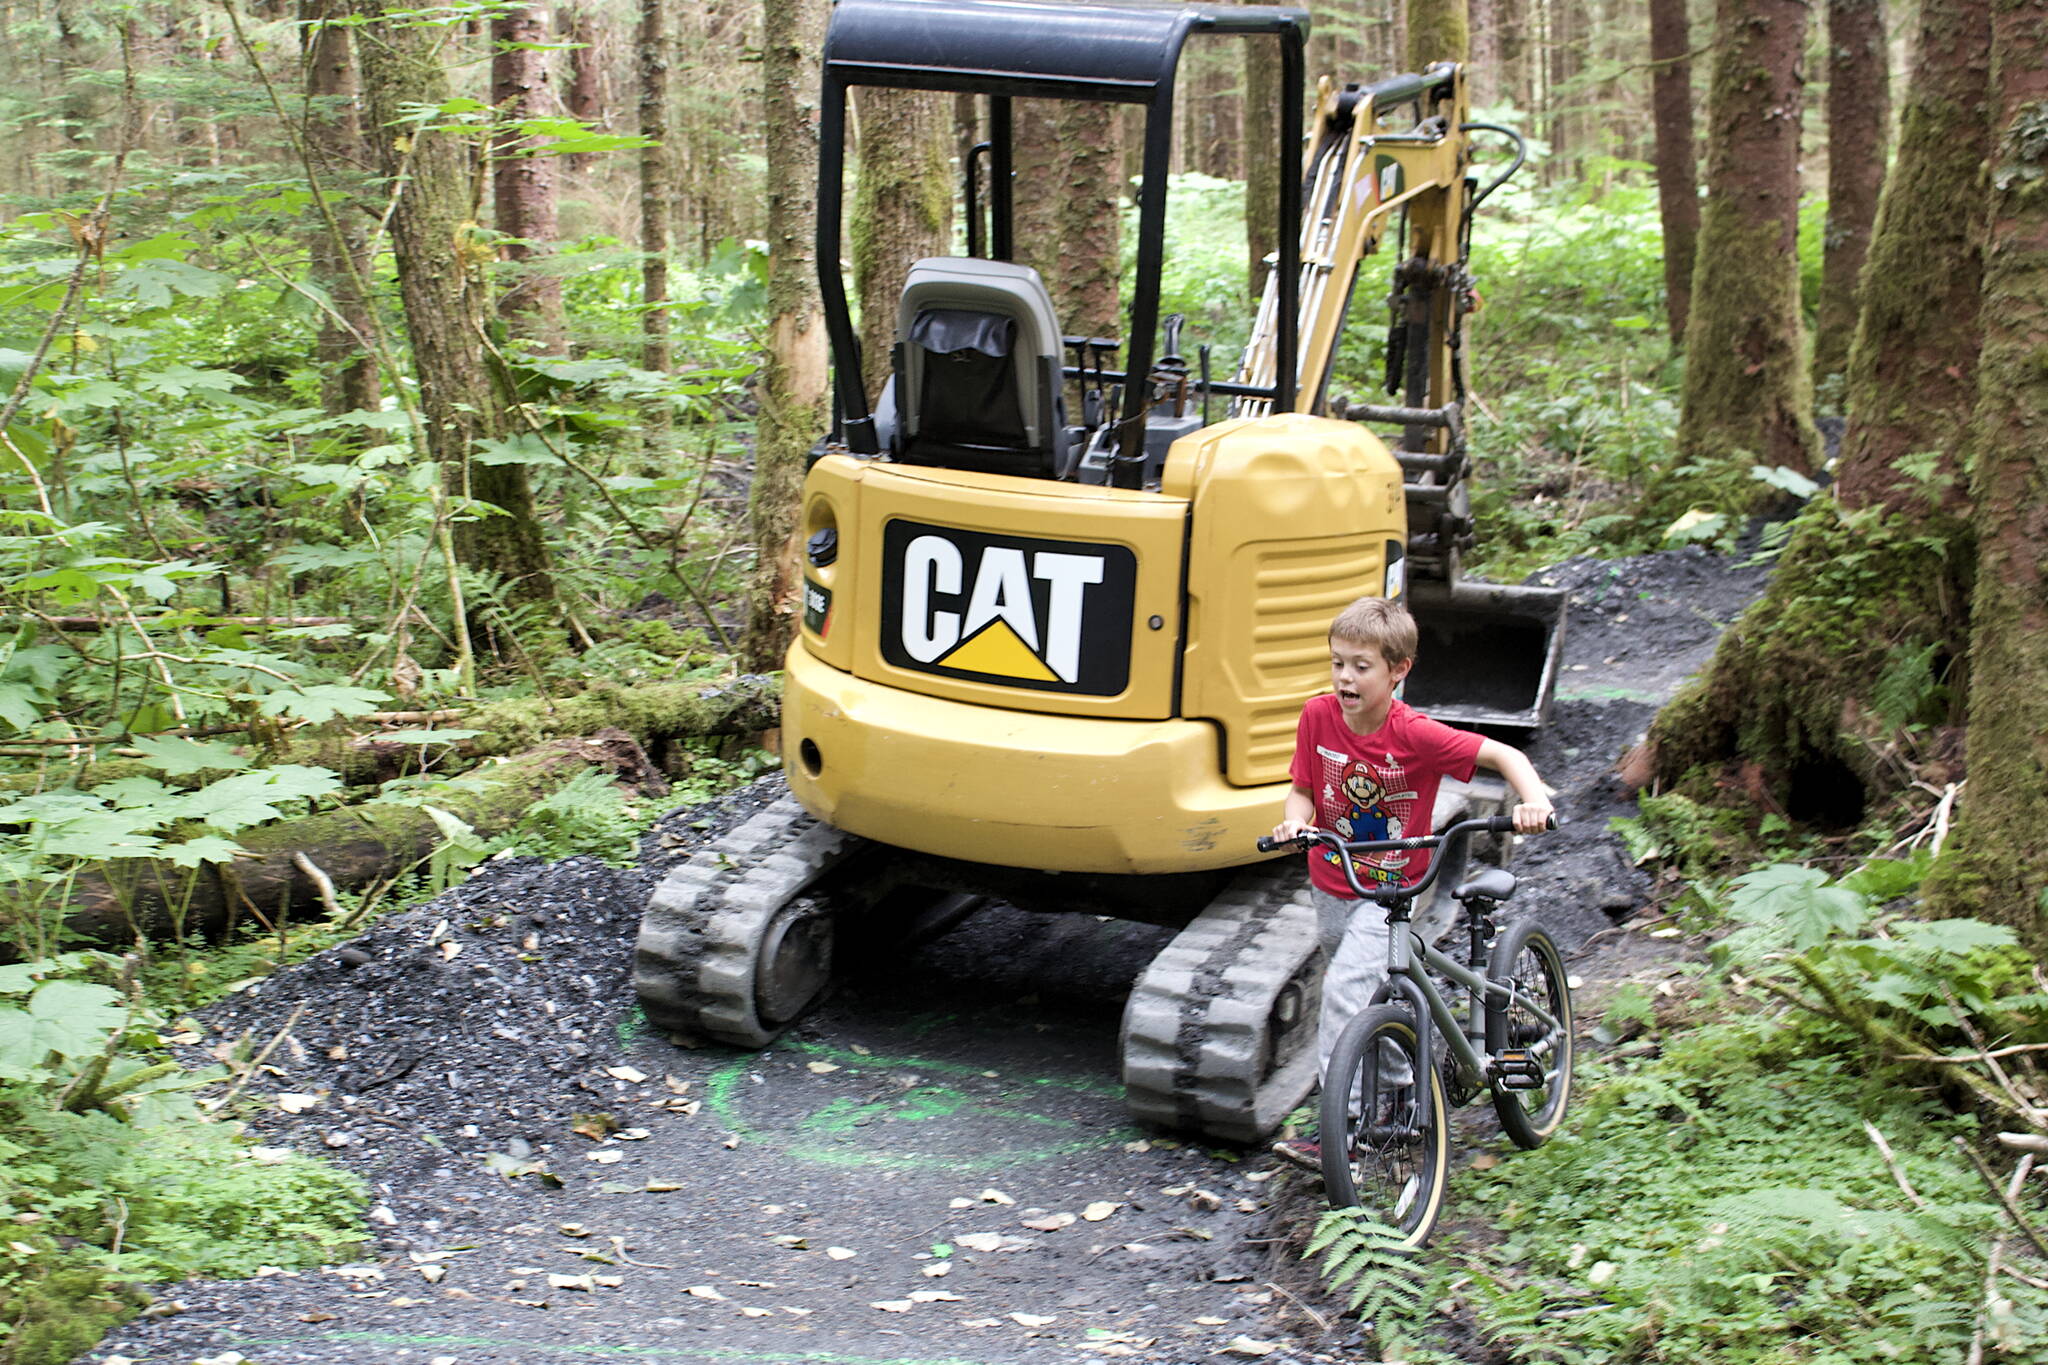 Jacob Crosland, 7, walks his bike around an excavator on the unfinished beginner’s trail at the new Thunder Mountain Bike Park on Saturday. Officials said the trails should be ready to ride on by early next week. (Mark Sabbatini / Juneau Empire)